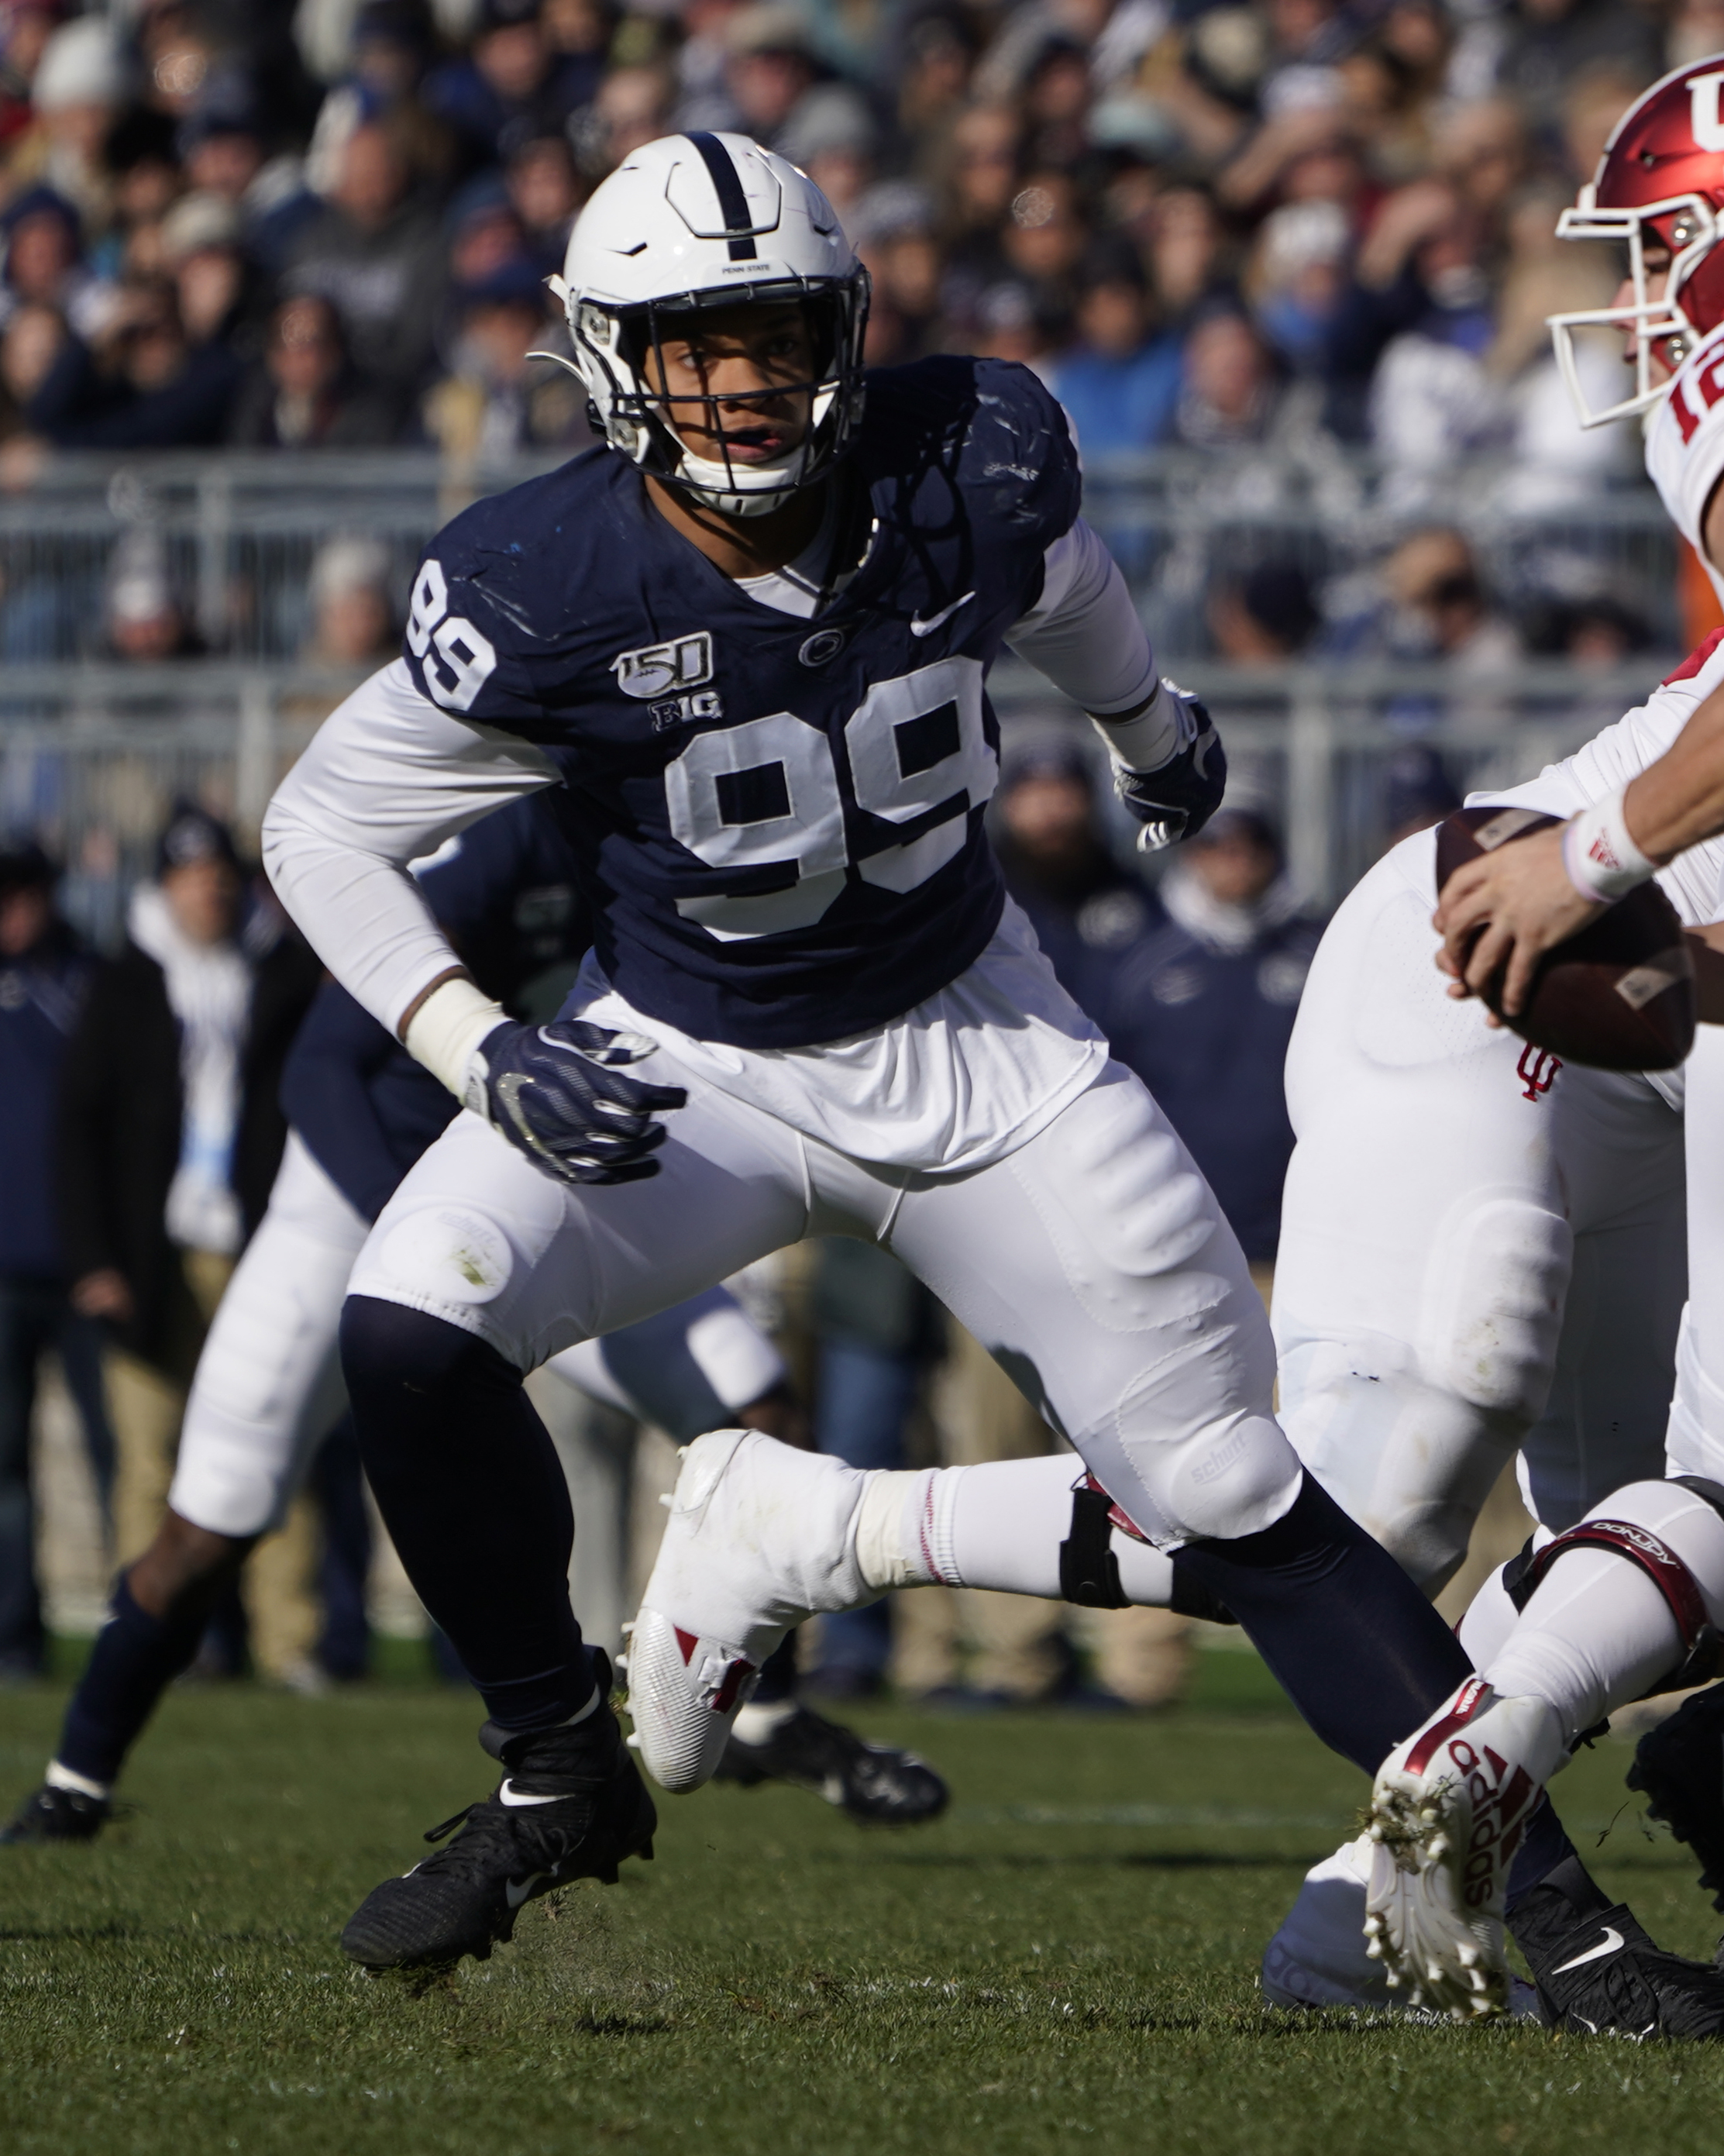 COLLEGE FOOTBALL: NOV 16 Indiana at Penn State